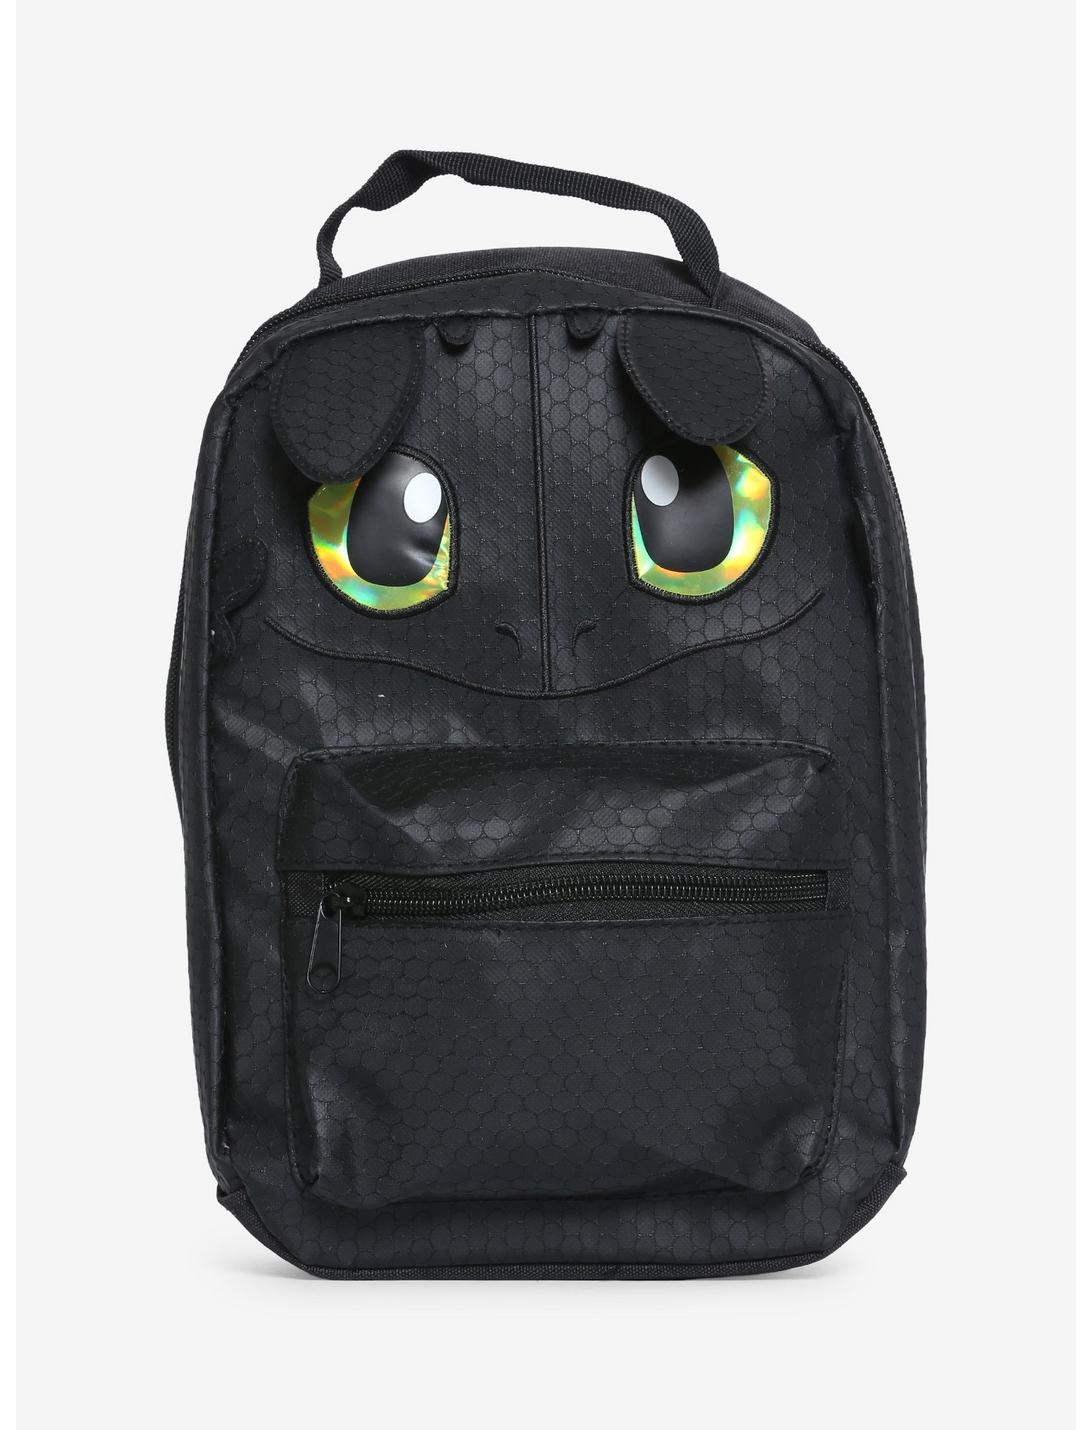 How To Train Your Dragon Toothless Figural Lunch Bag, , hi-res